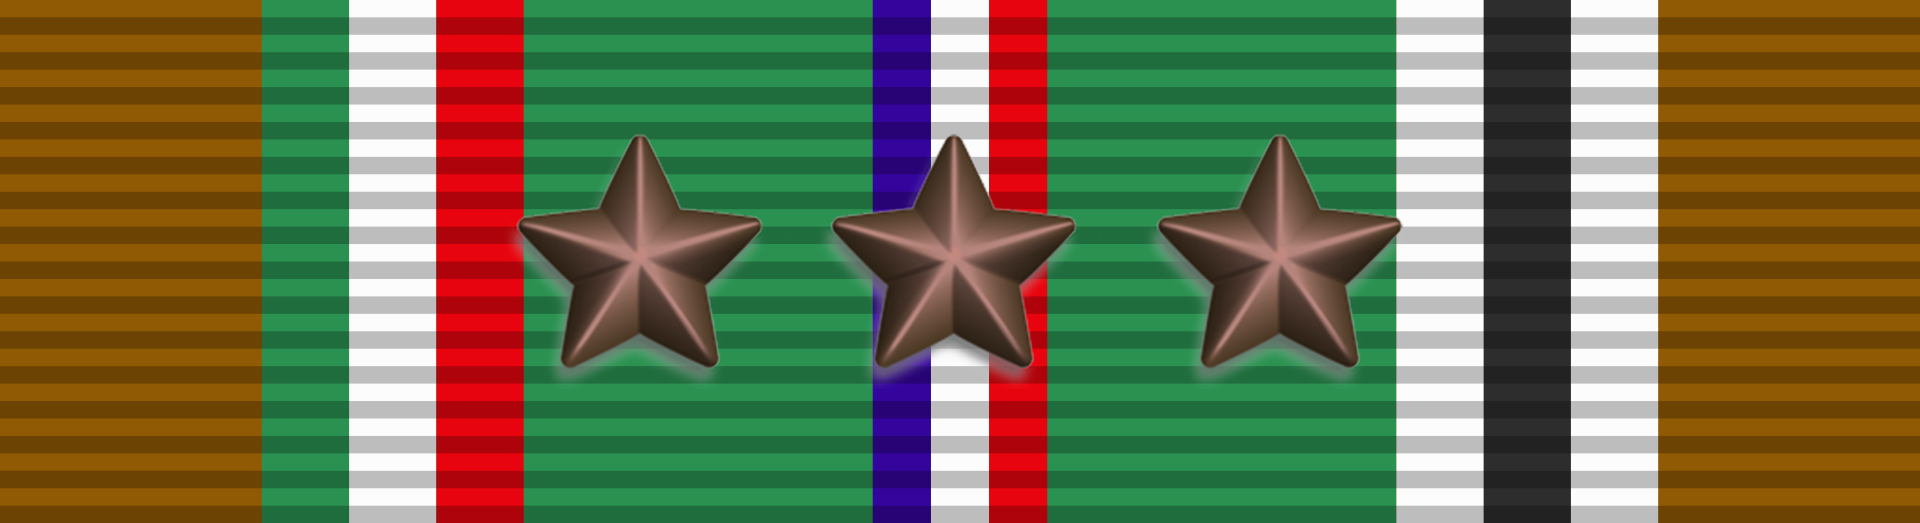 European African Middle Eastern Campaign Medal with three Bronze campaign star